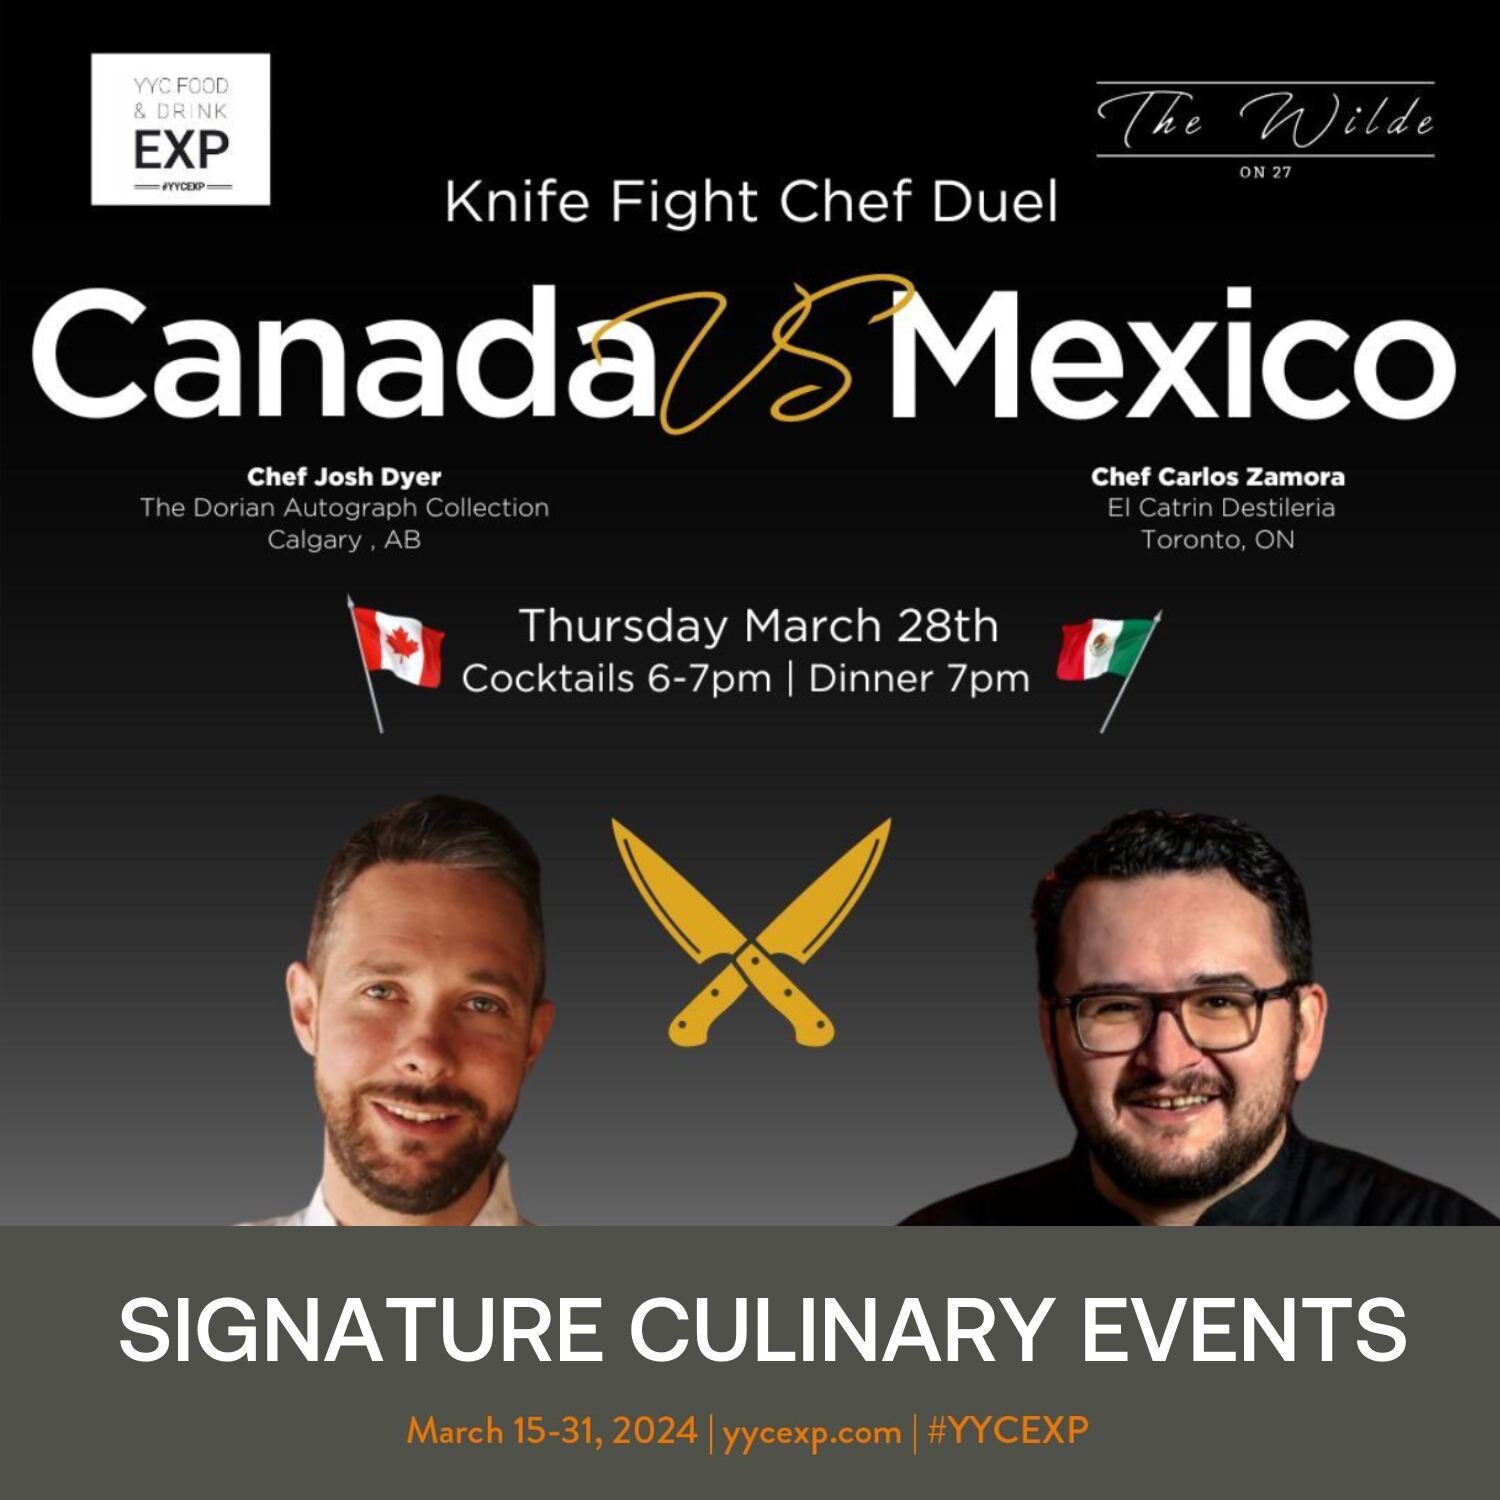 Prepare your taste buds for the ultimate culinary showdown! Join us at this YYC EXP signature event as Chef Josh Dyer from The Wilde on 27 takes on Chef Carlos Zamora from Toronto&rsquo;s El Catrin Destileria in a battle of flavours, representing Can